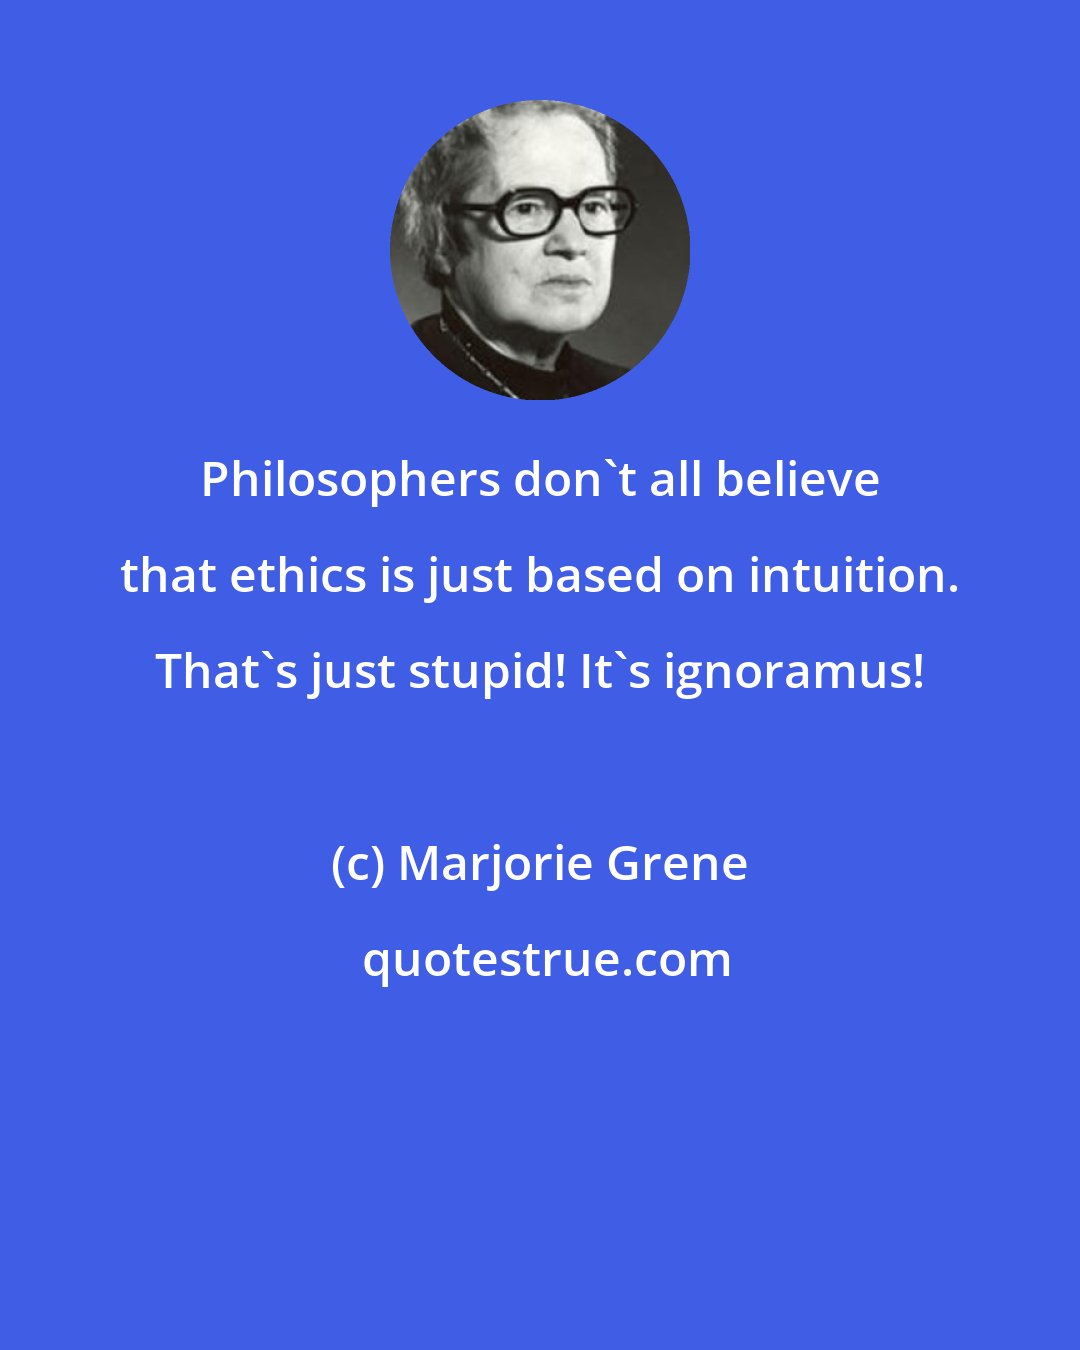 Marjorie Grene: Philosophers don't all believe that ethics is just based on intuition. That's just stupid! It's ignoramus!